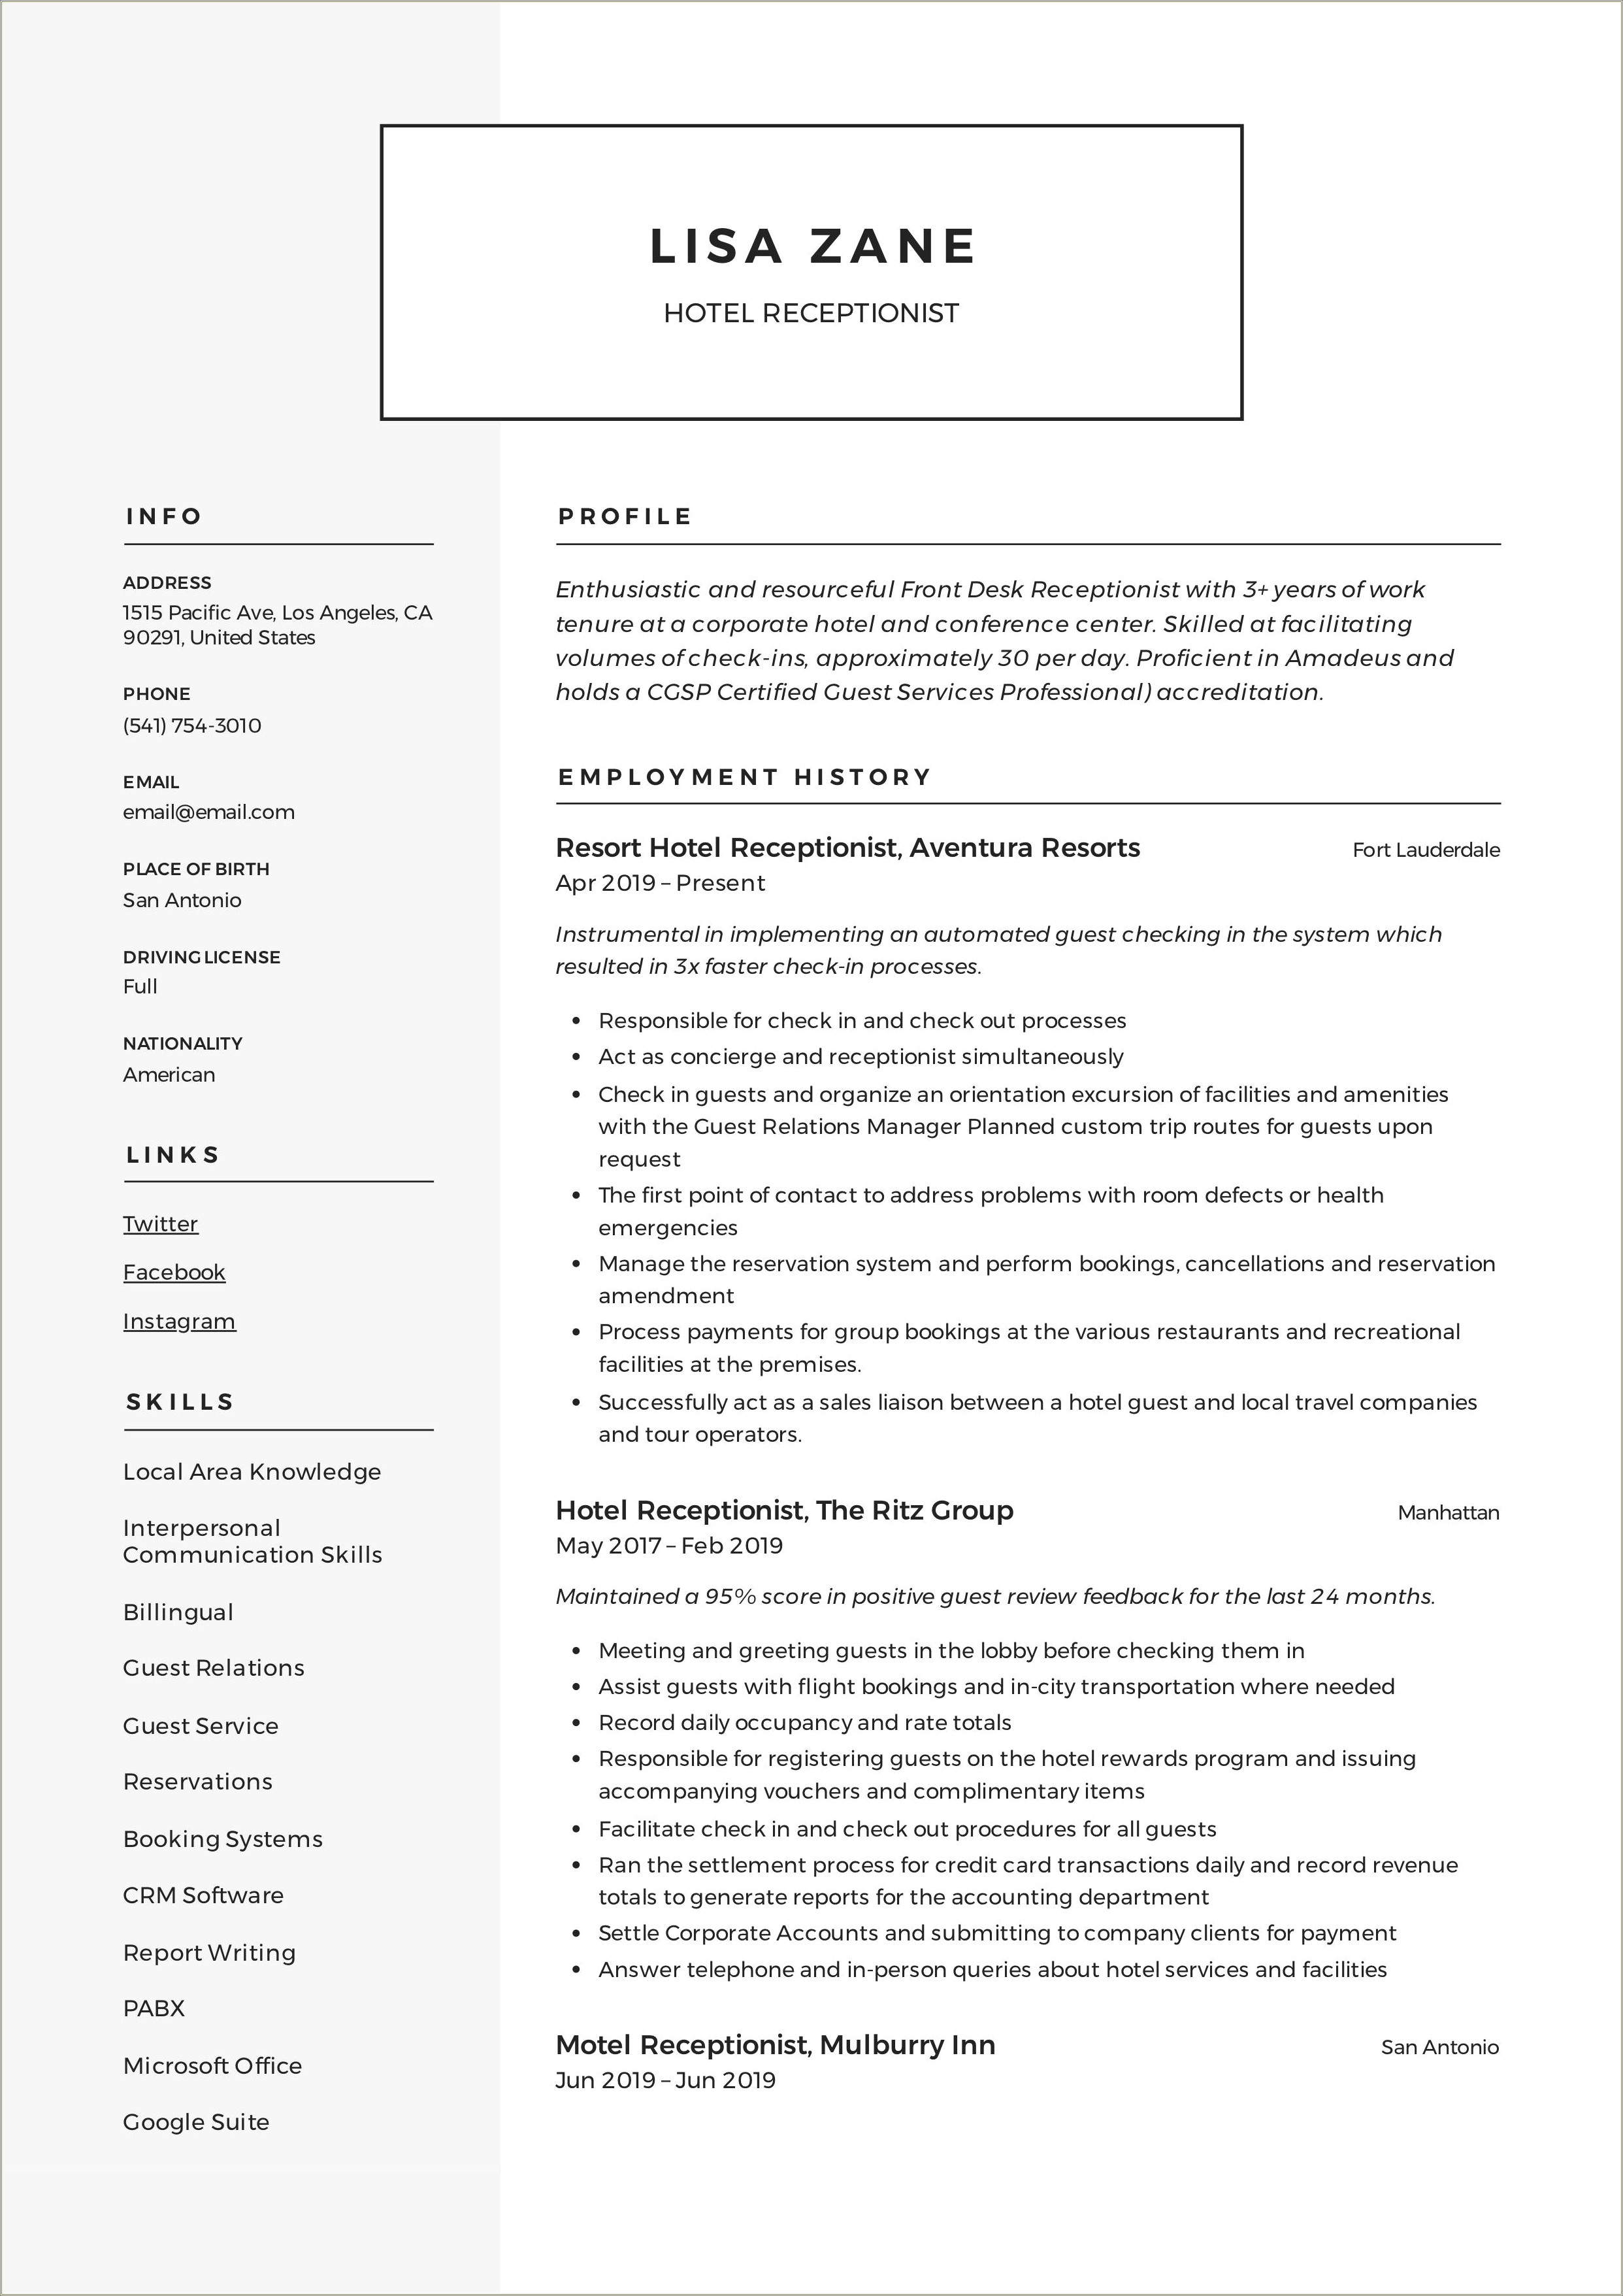 Resume For Hotel Receptionist With Experience